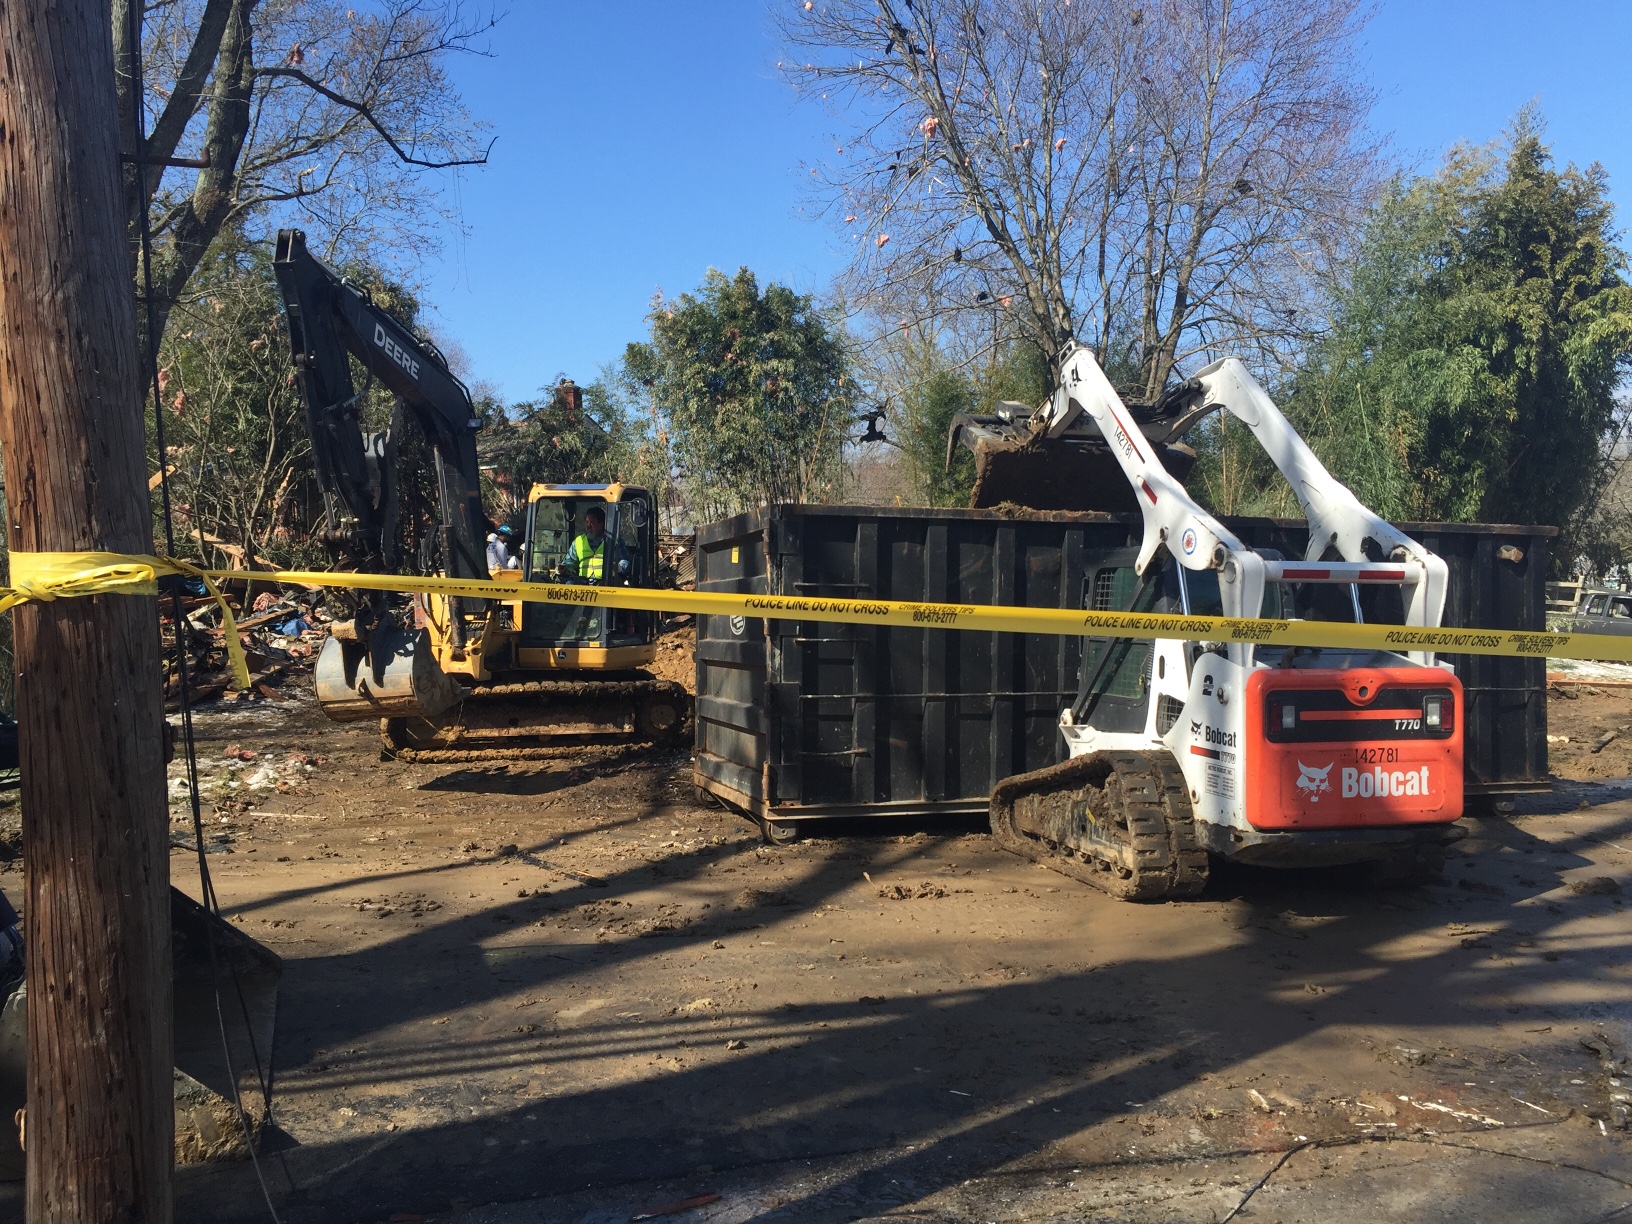 Equipment surrounds the scene of the home explosion that occurred Friday in Rockville, Md. (WTOP/Dennis Foley)